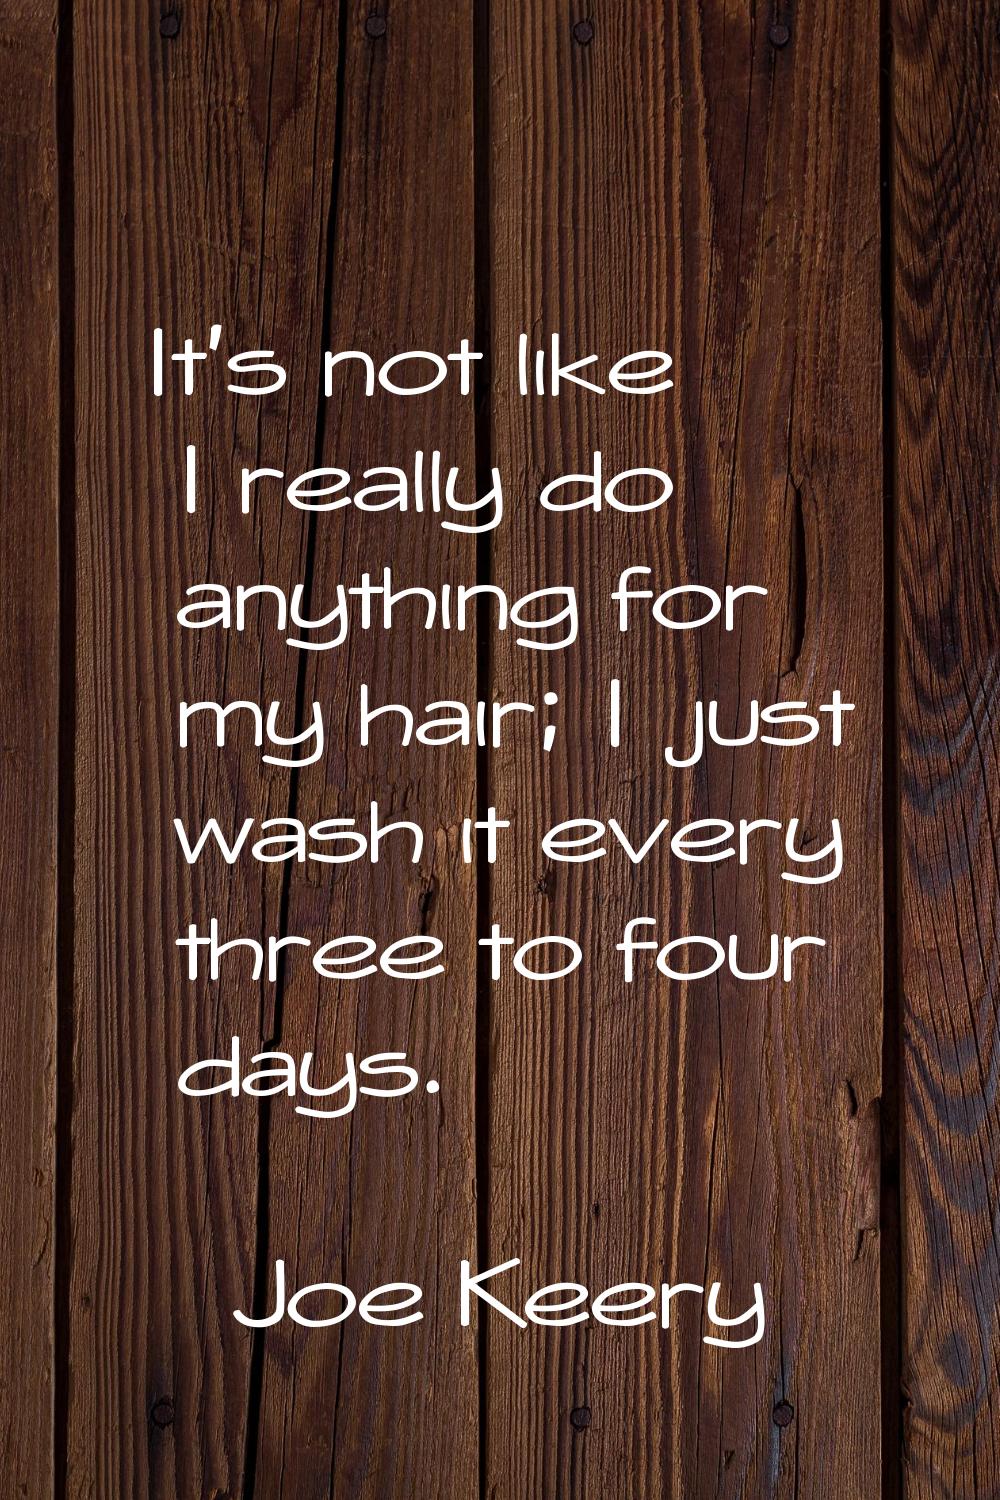 It's not like I really do anything for my hair; I just wash it every three to four days.